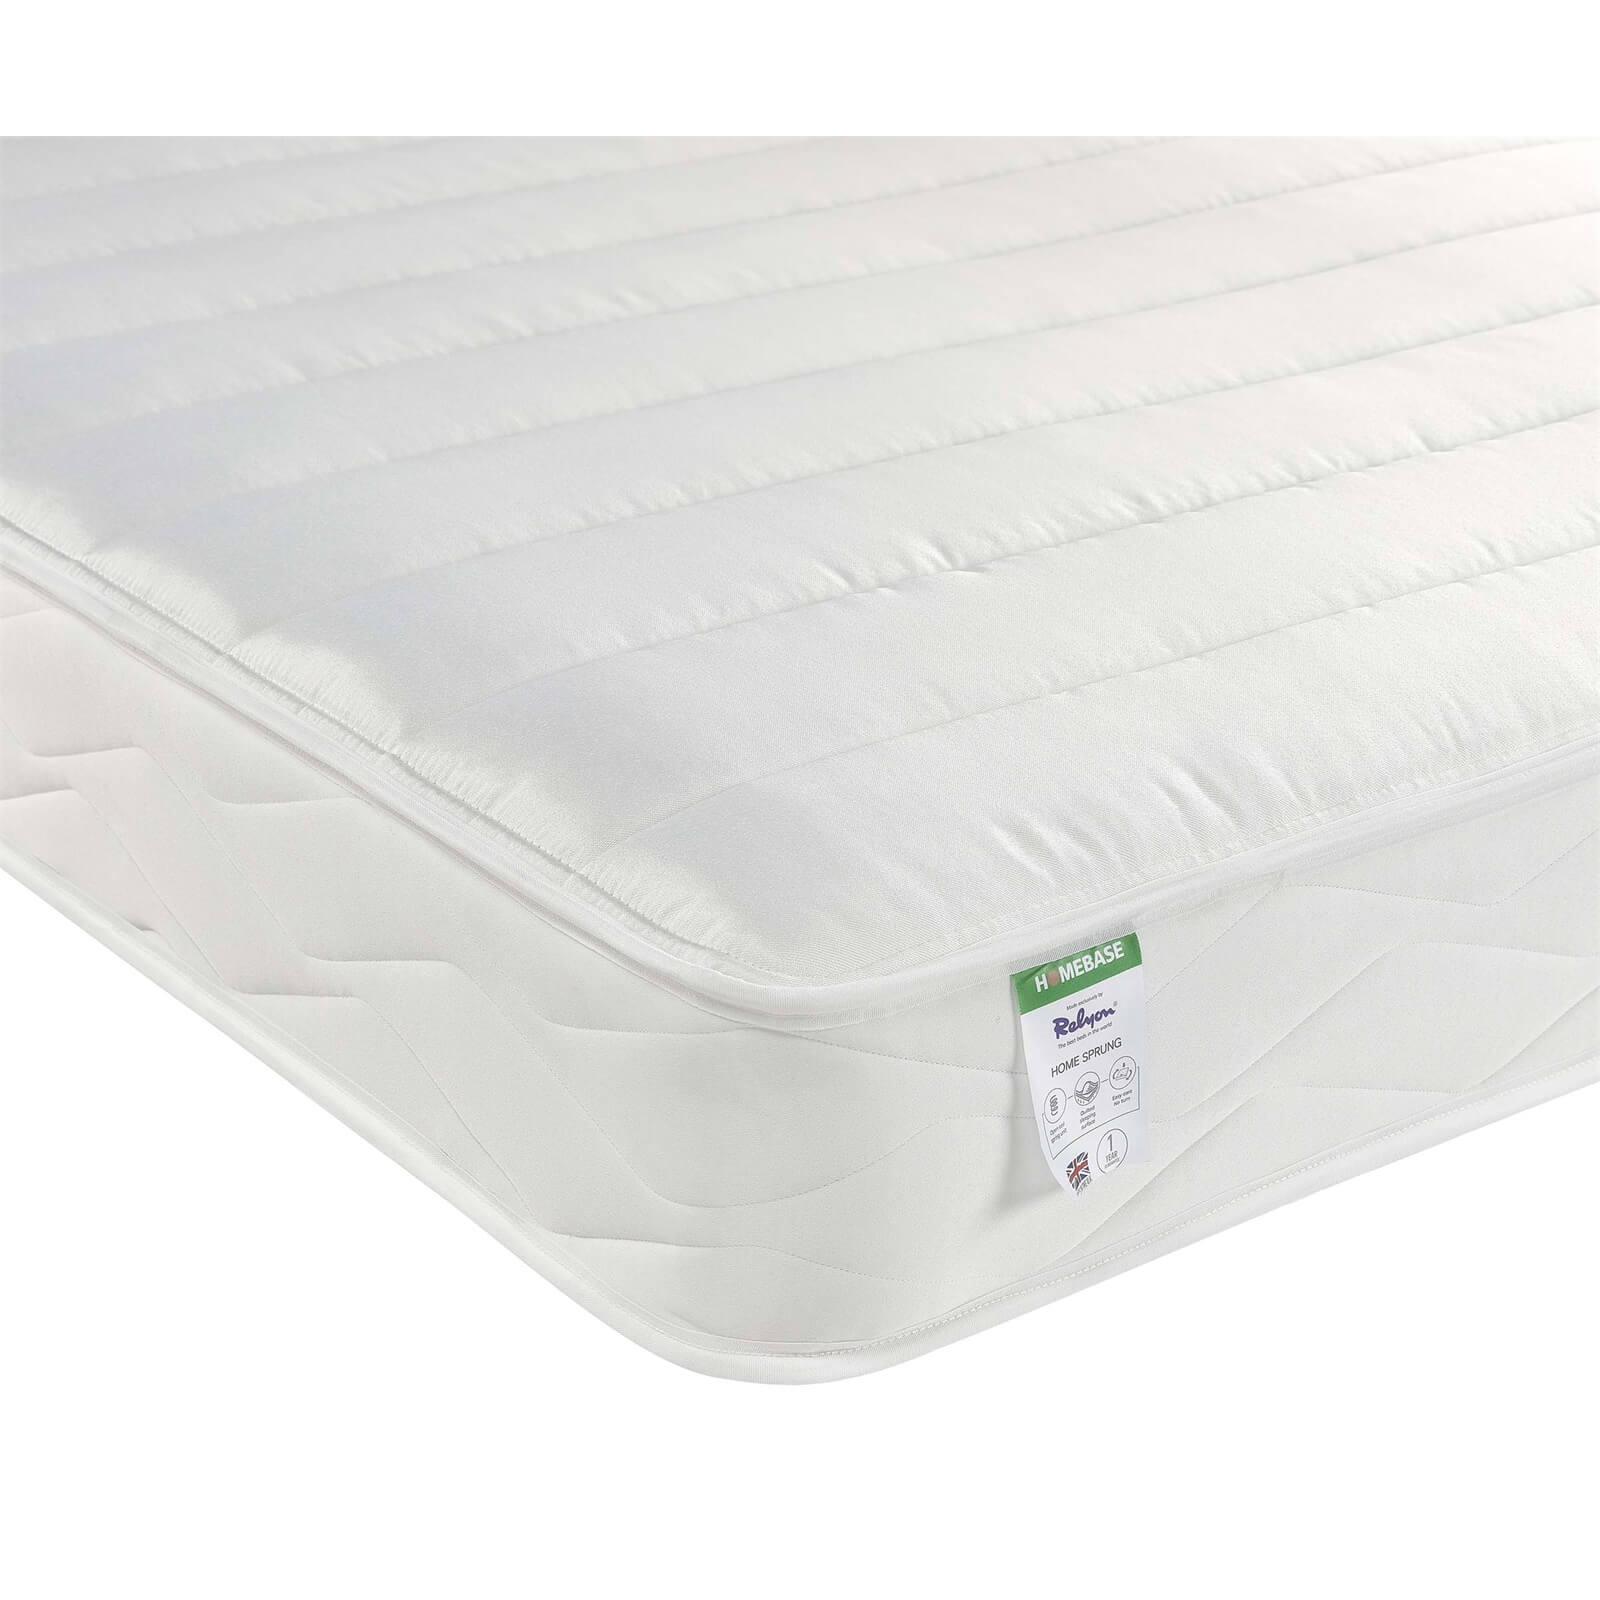 Relyon Open Coil Rolled Mattress - Single